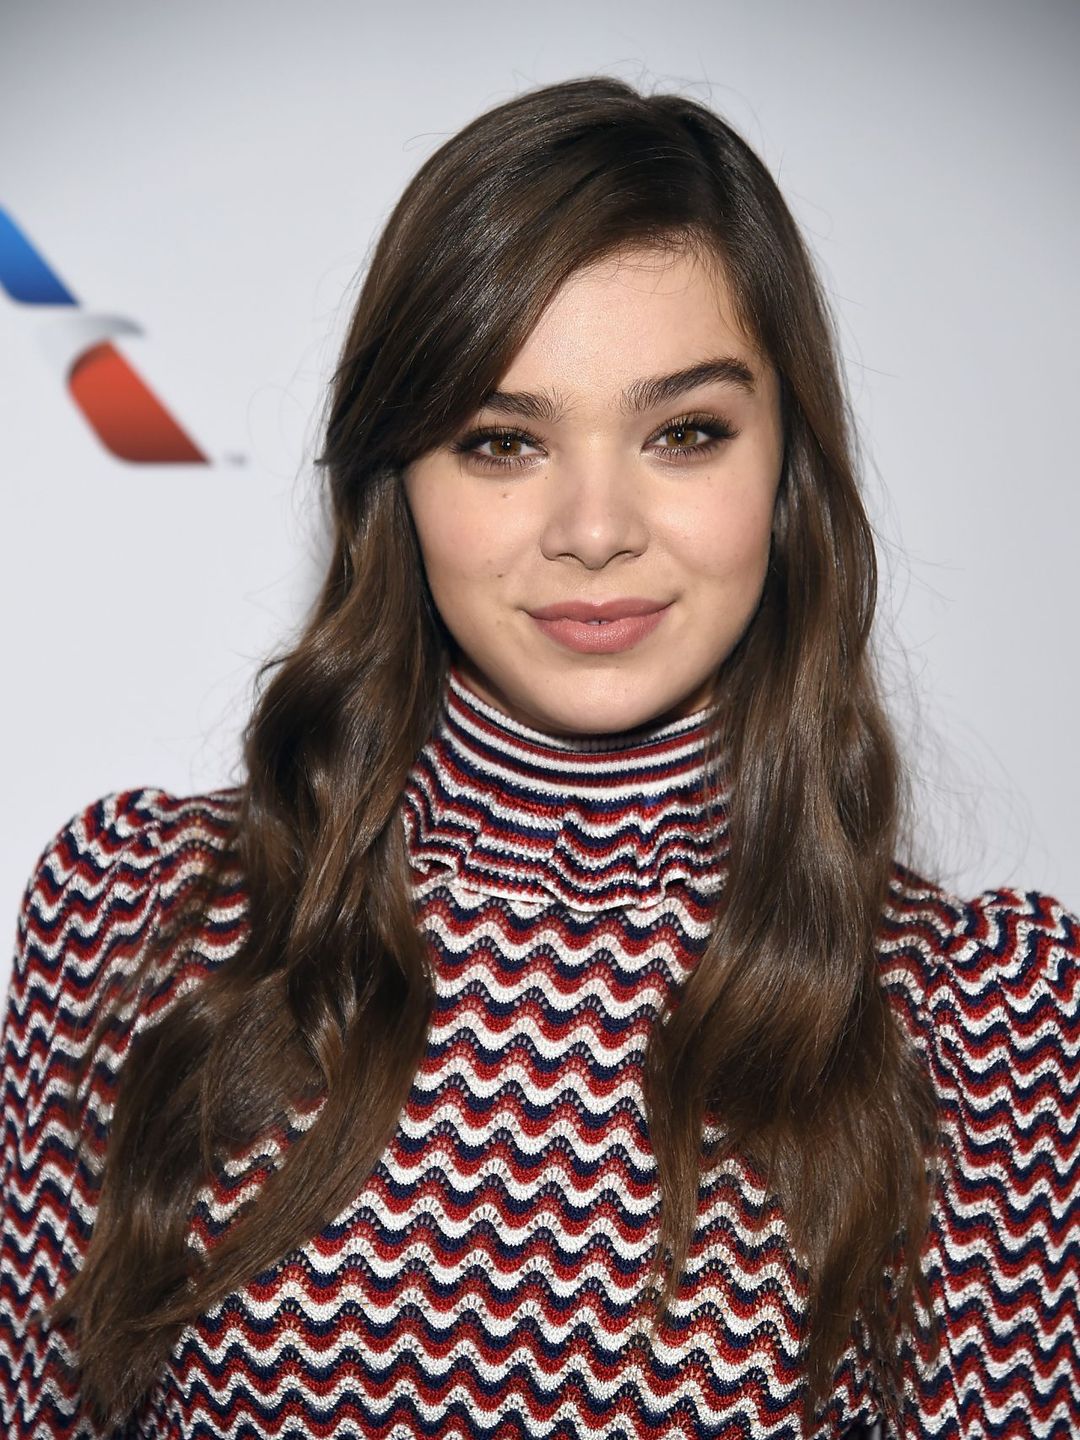 Hailee Steinfeld how did she became famous